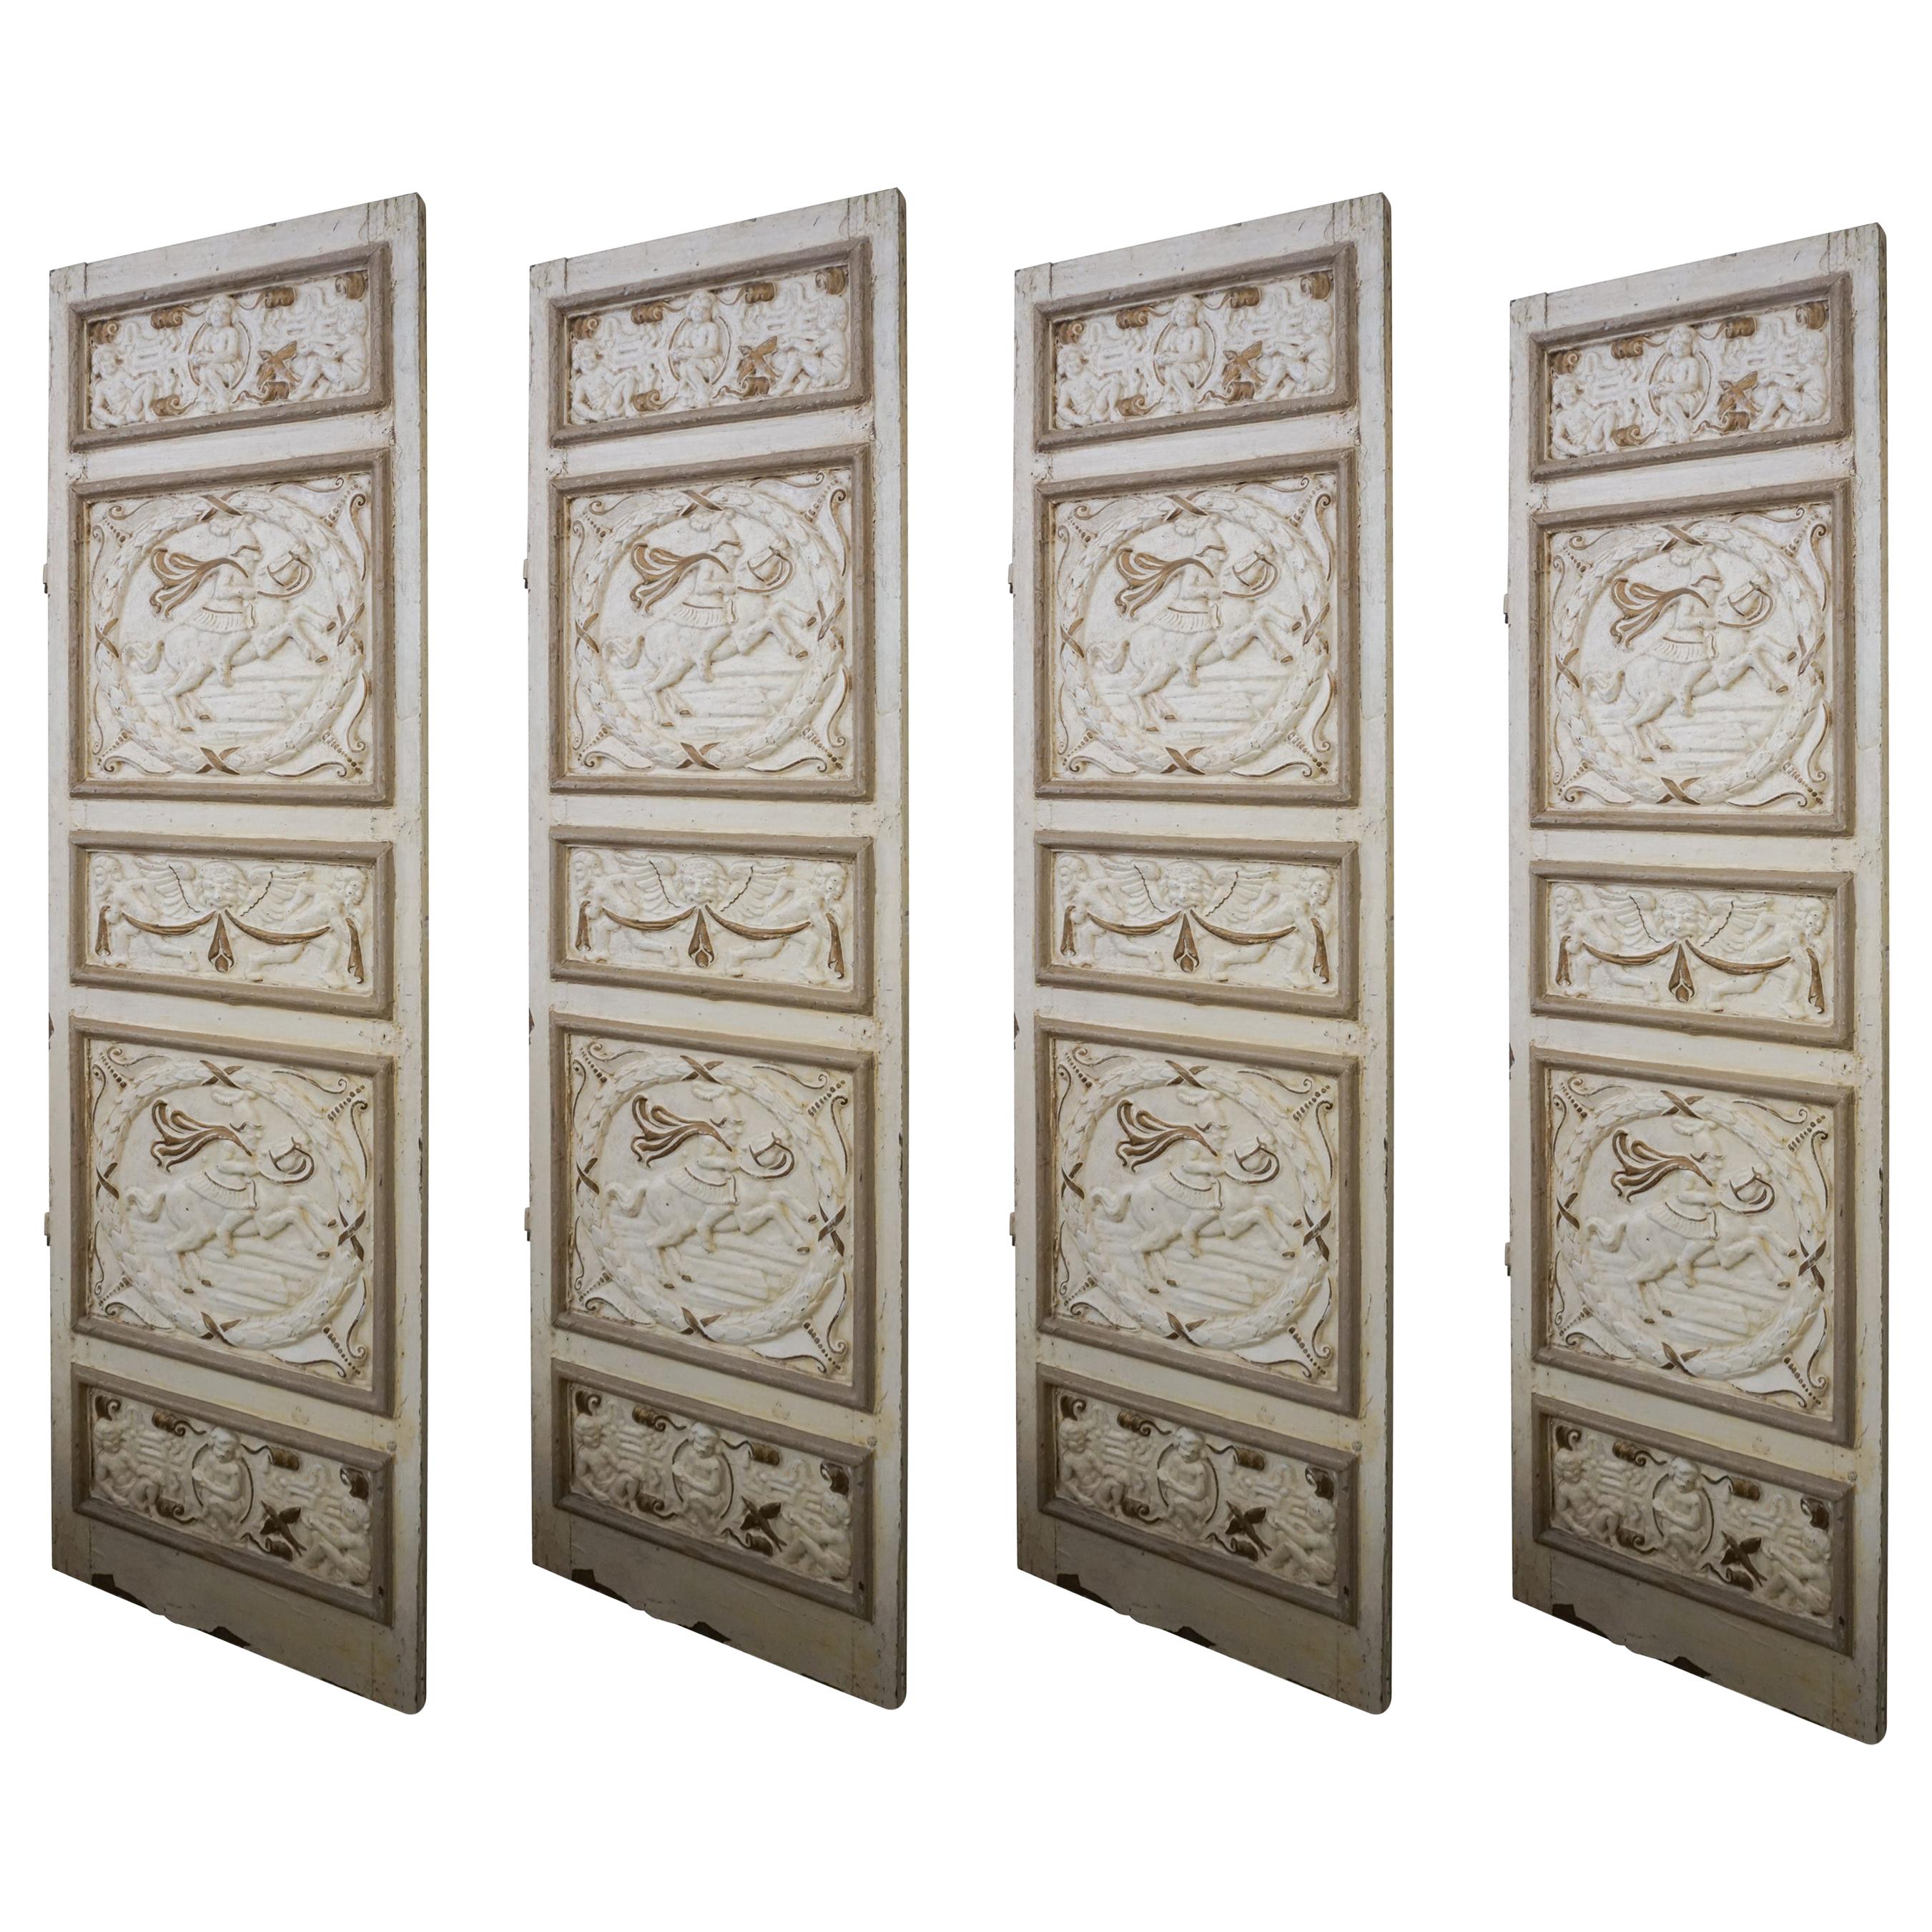 Antique French Divider Doors, Set of 4